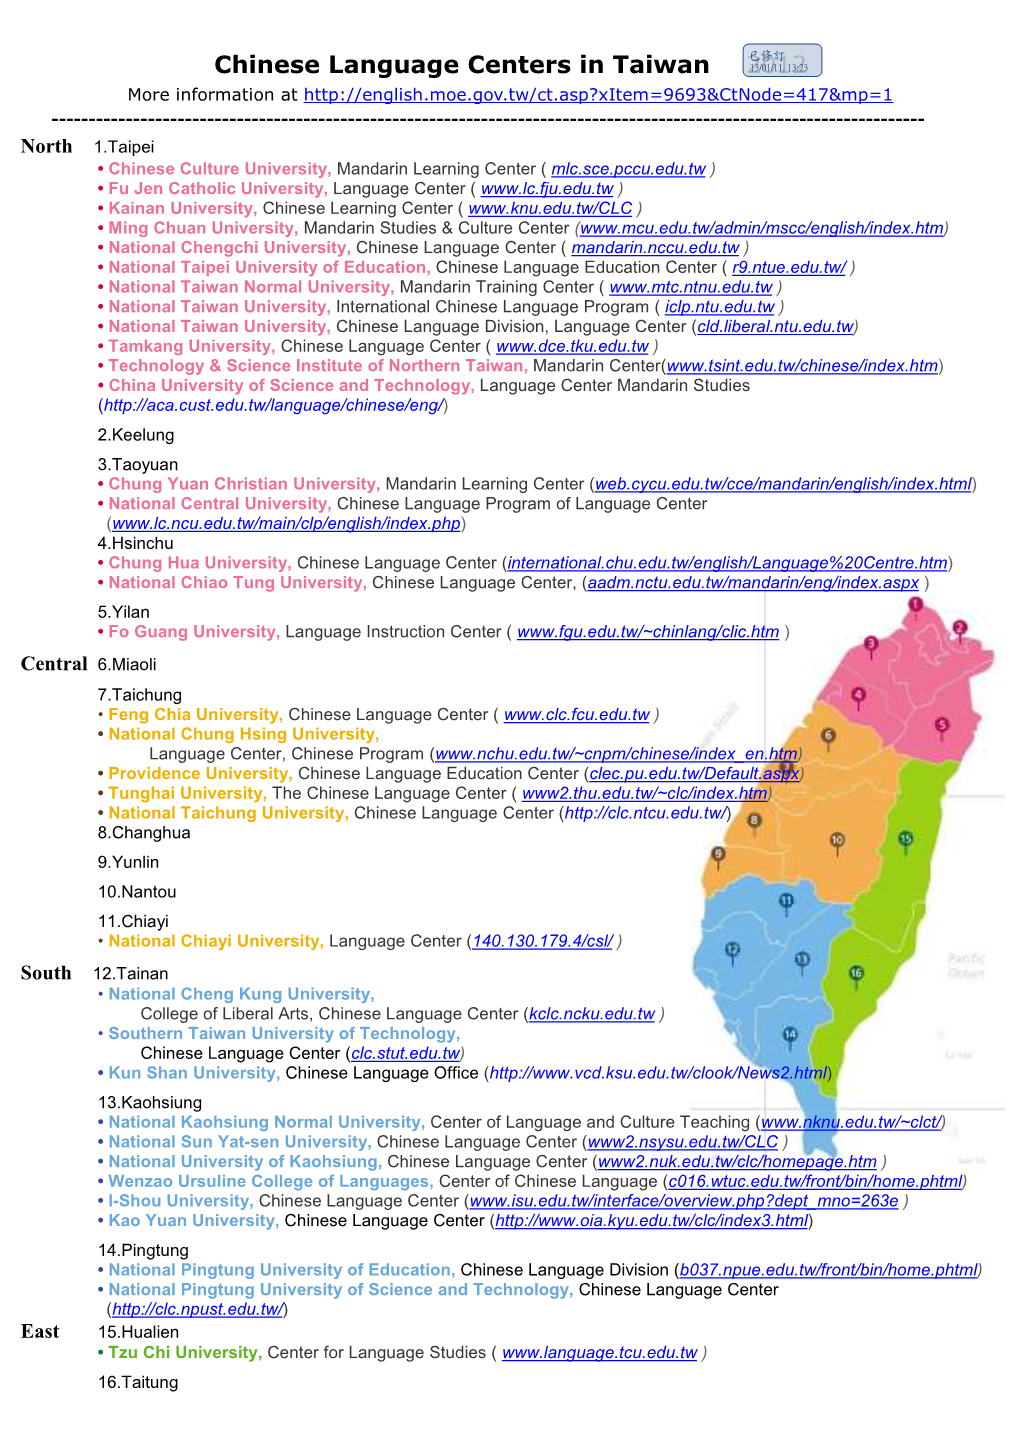 Chinese Language Centers in Taiwan 2012